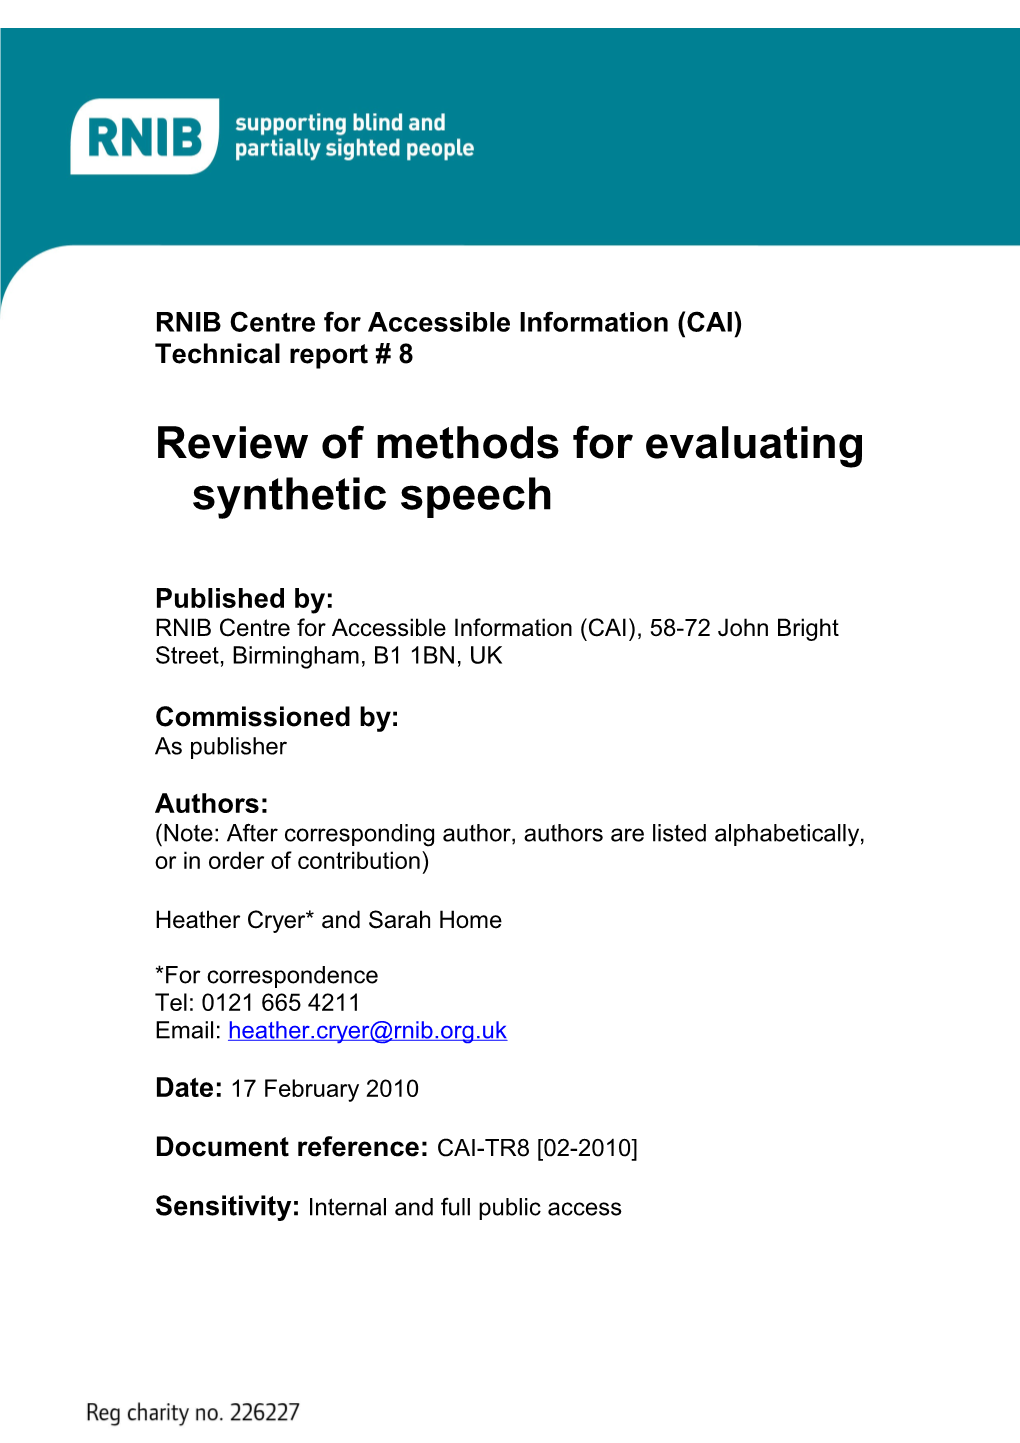 Review of Methods for Evaluating Synthetic Speech